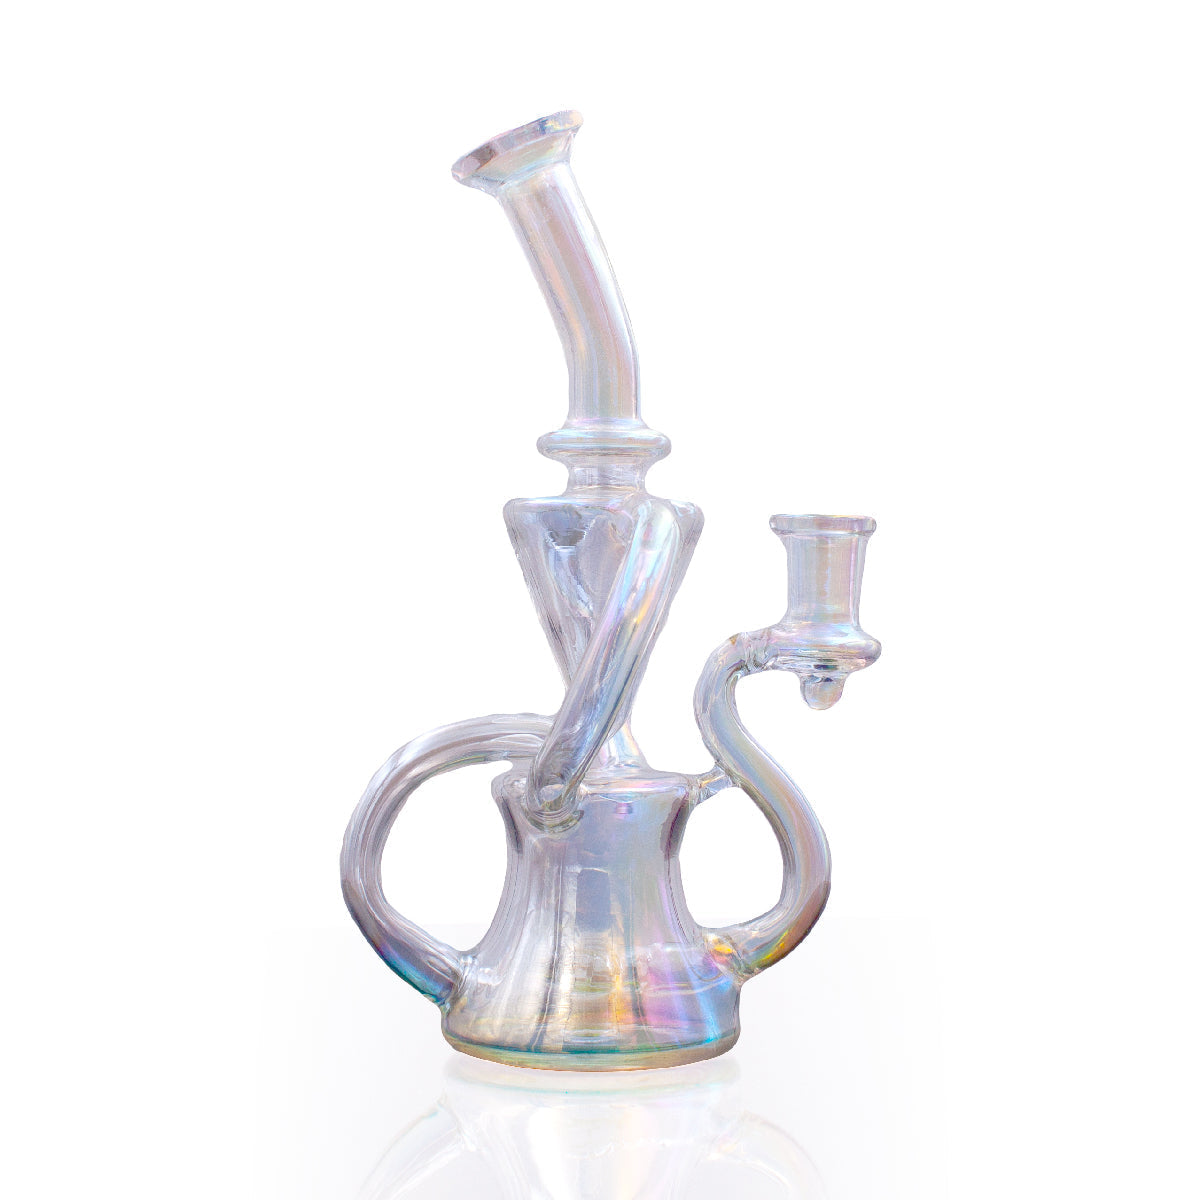 8" Showerhead Recycler Dab Rig by The Stash Shack with clear glass and side view